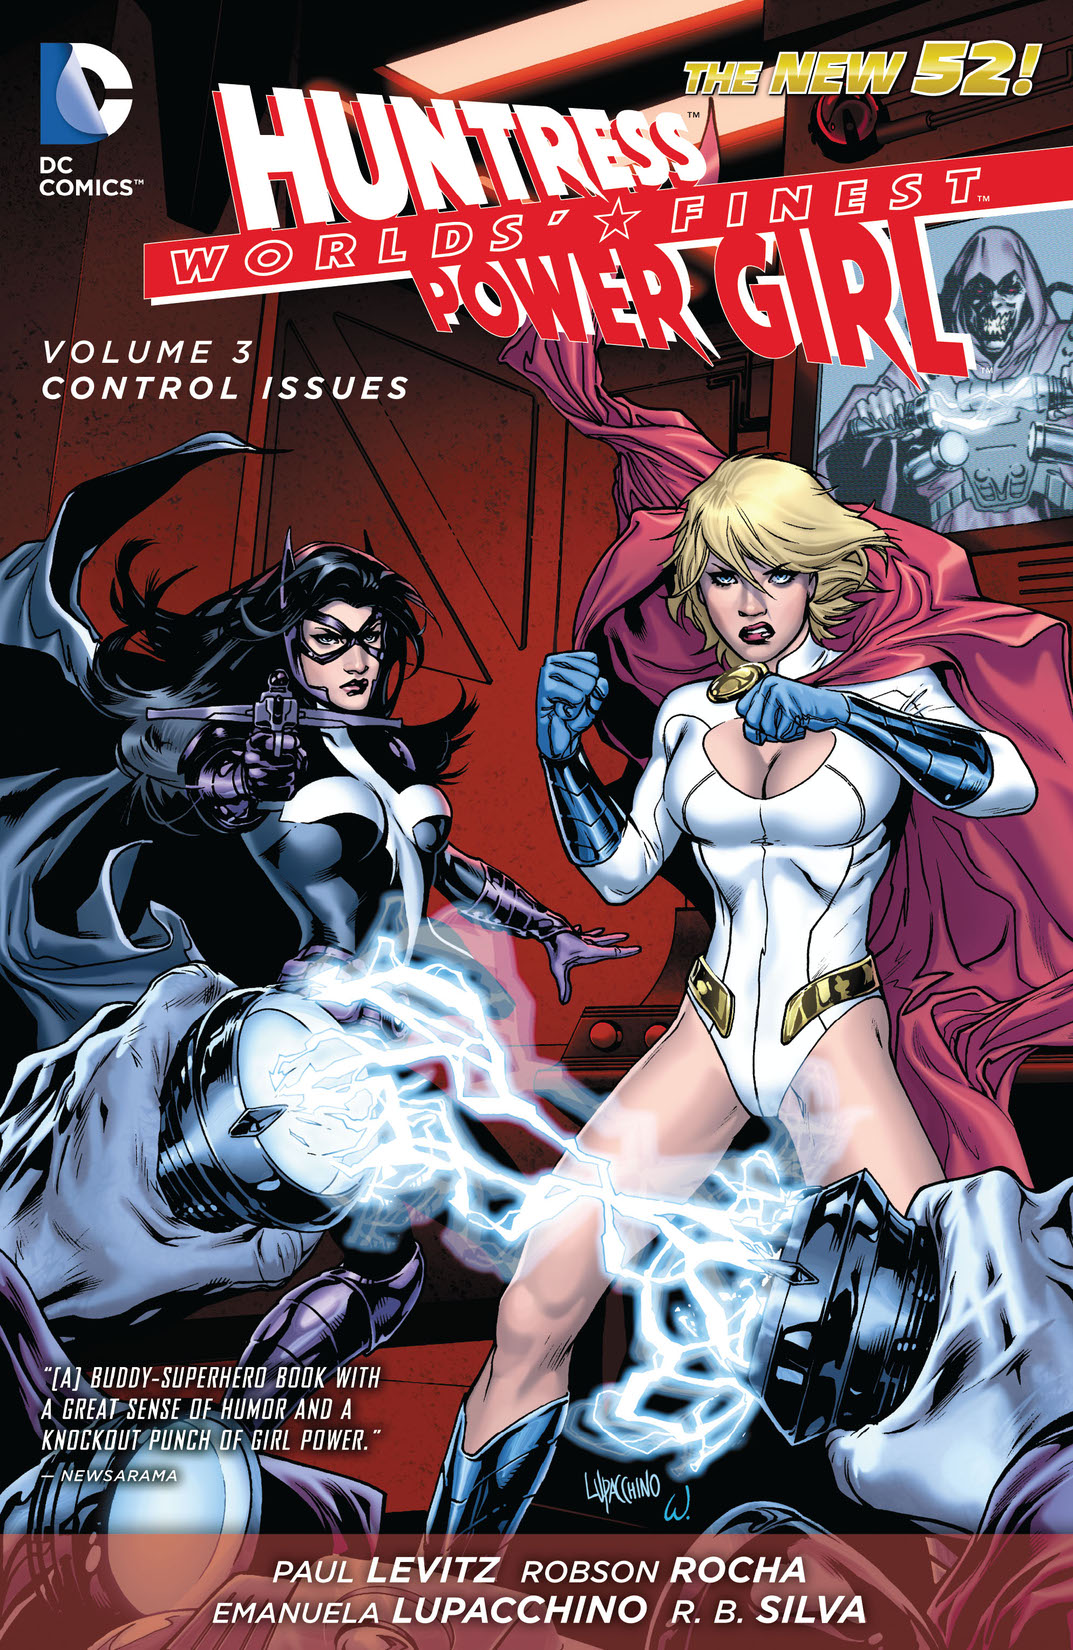 Worlds' Finest Vol. 3: Control Issues preview images